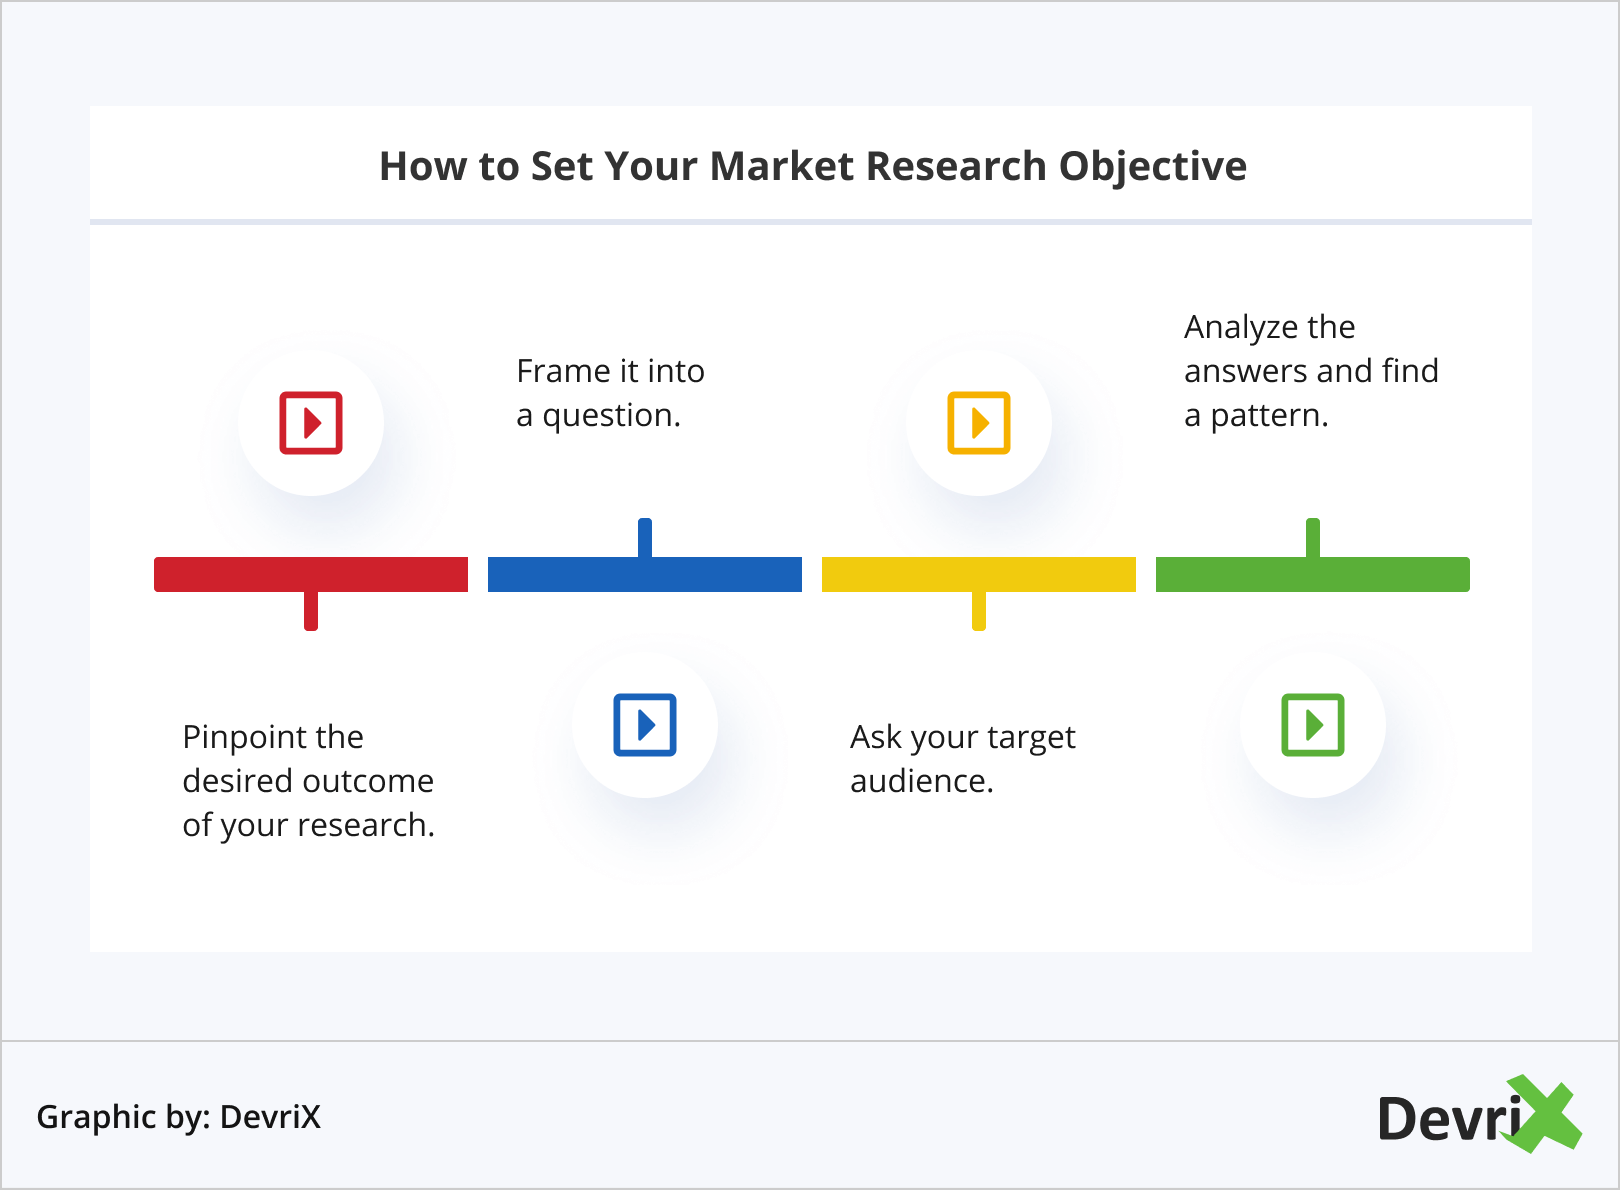 How to Set Your Market Research Objective